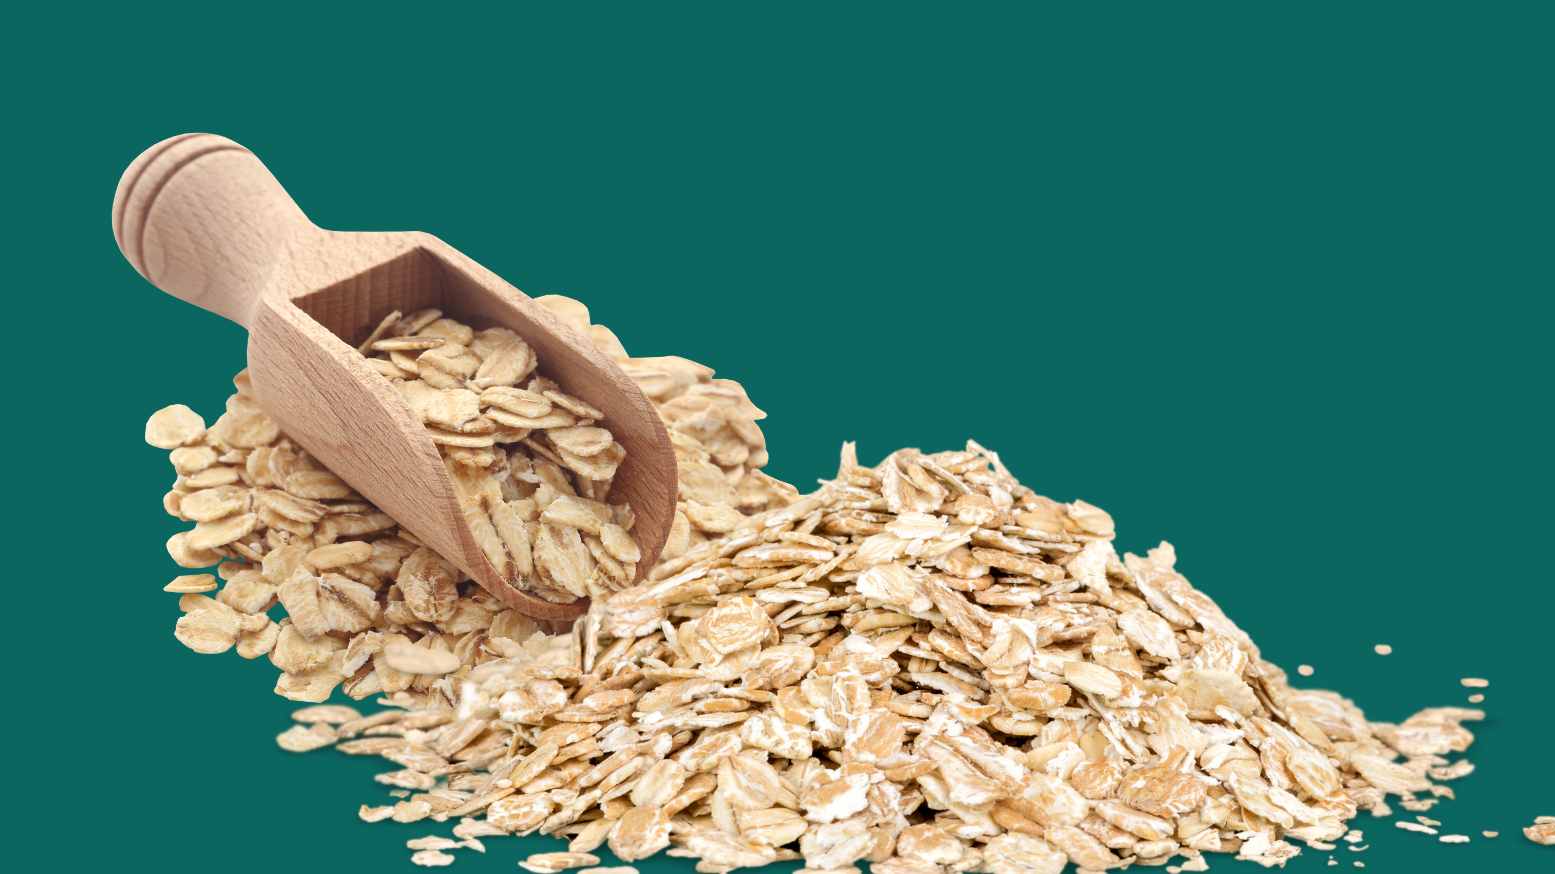 An image of Oatmeal